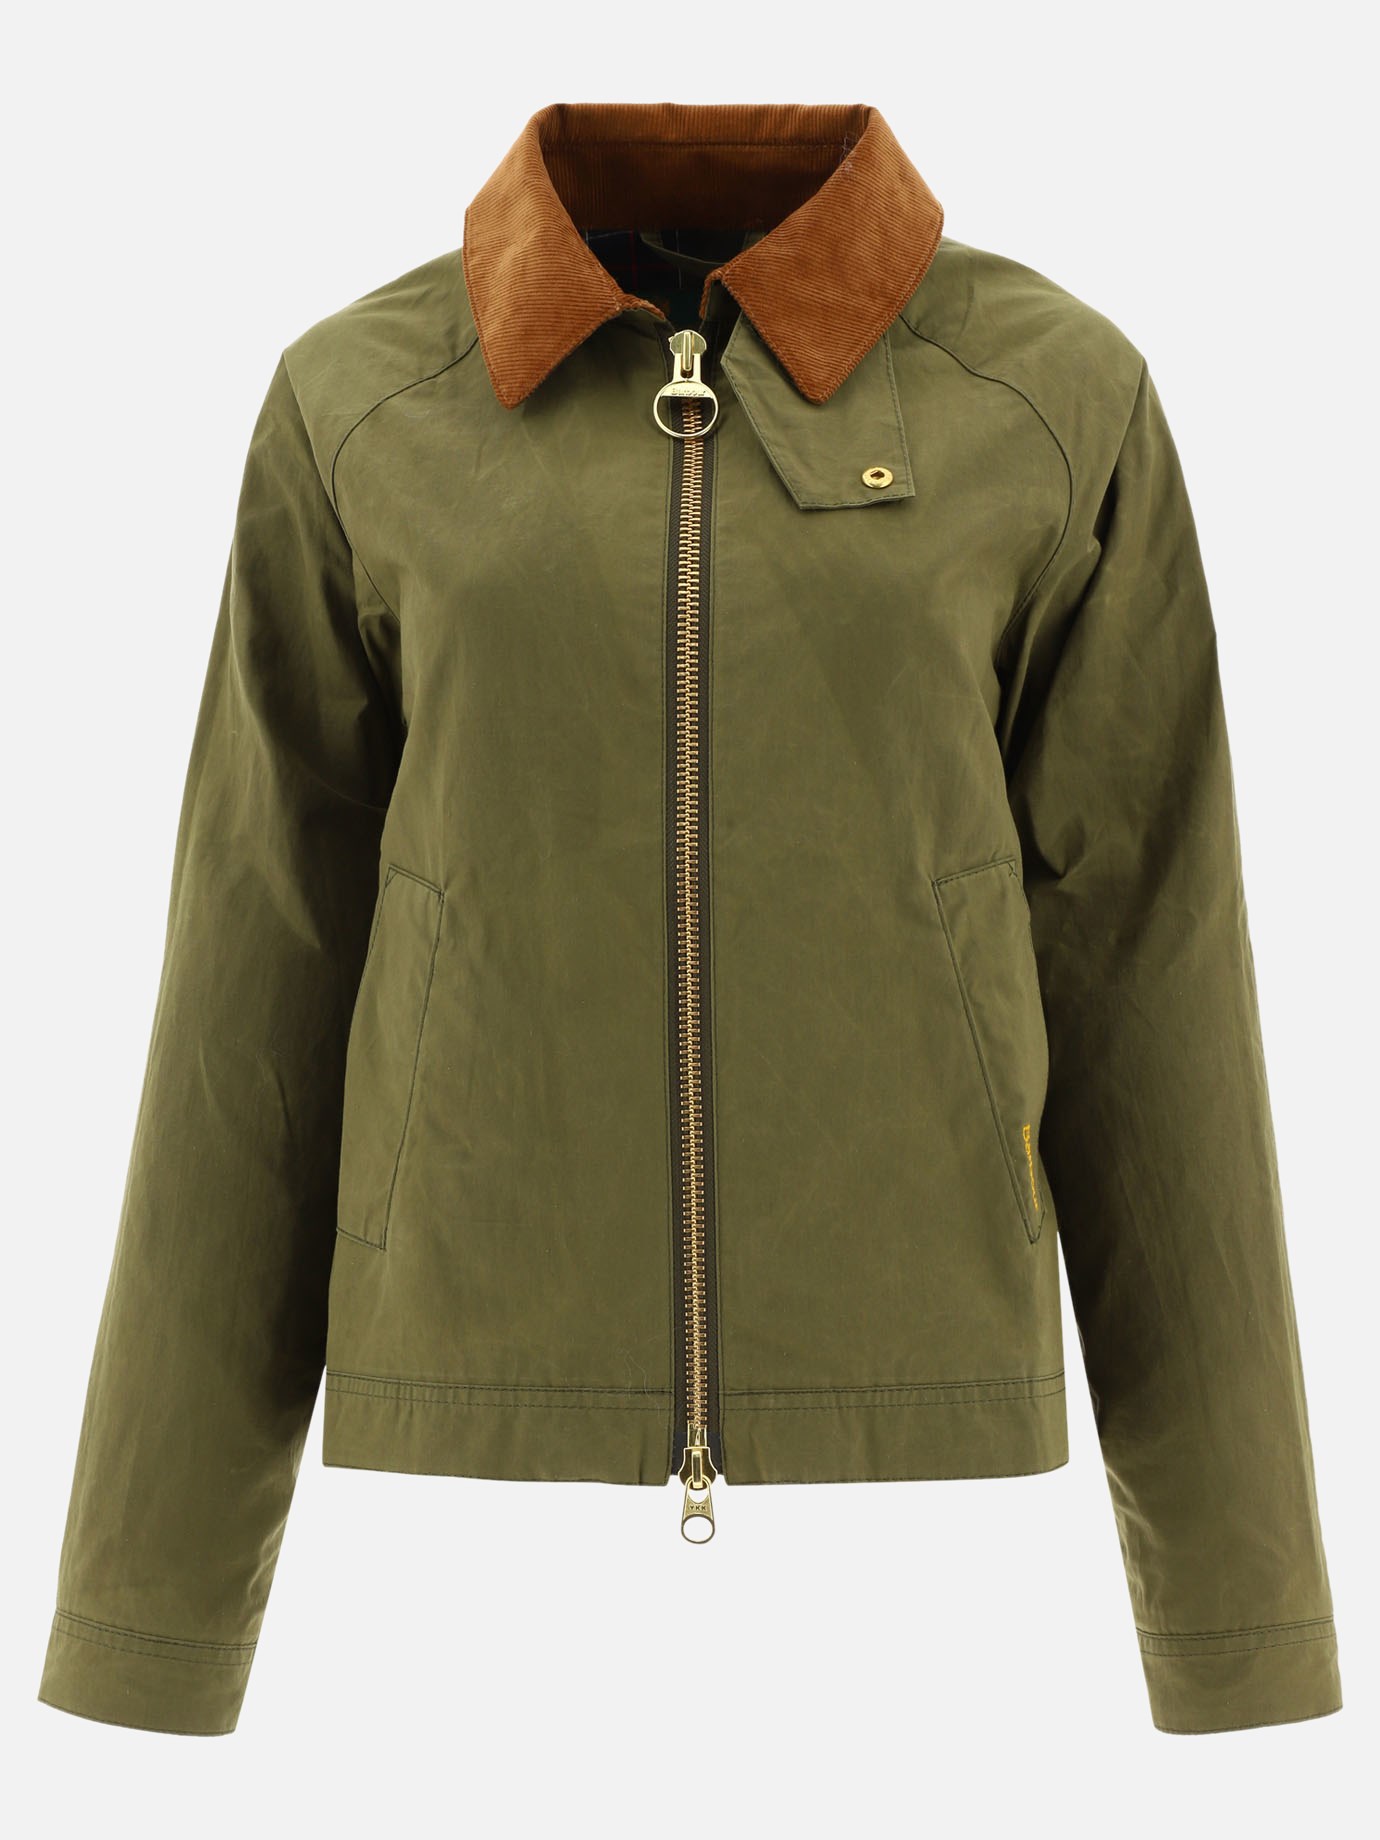  Campbell  jacketby Barbour - 1